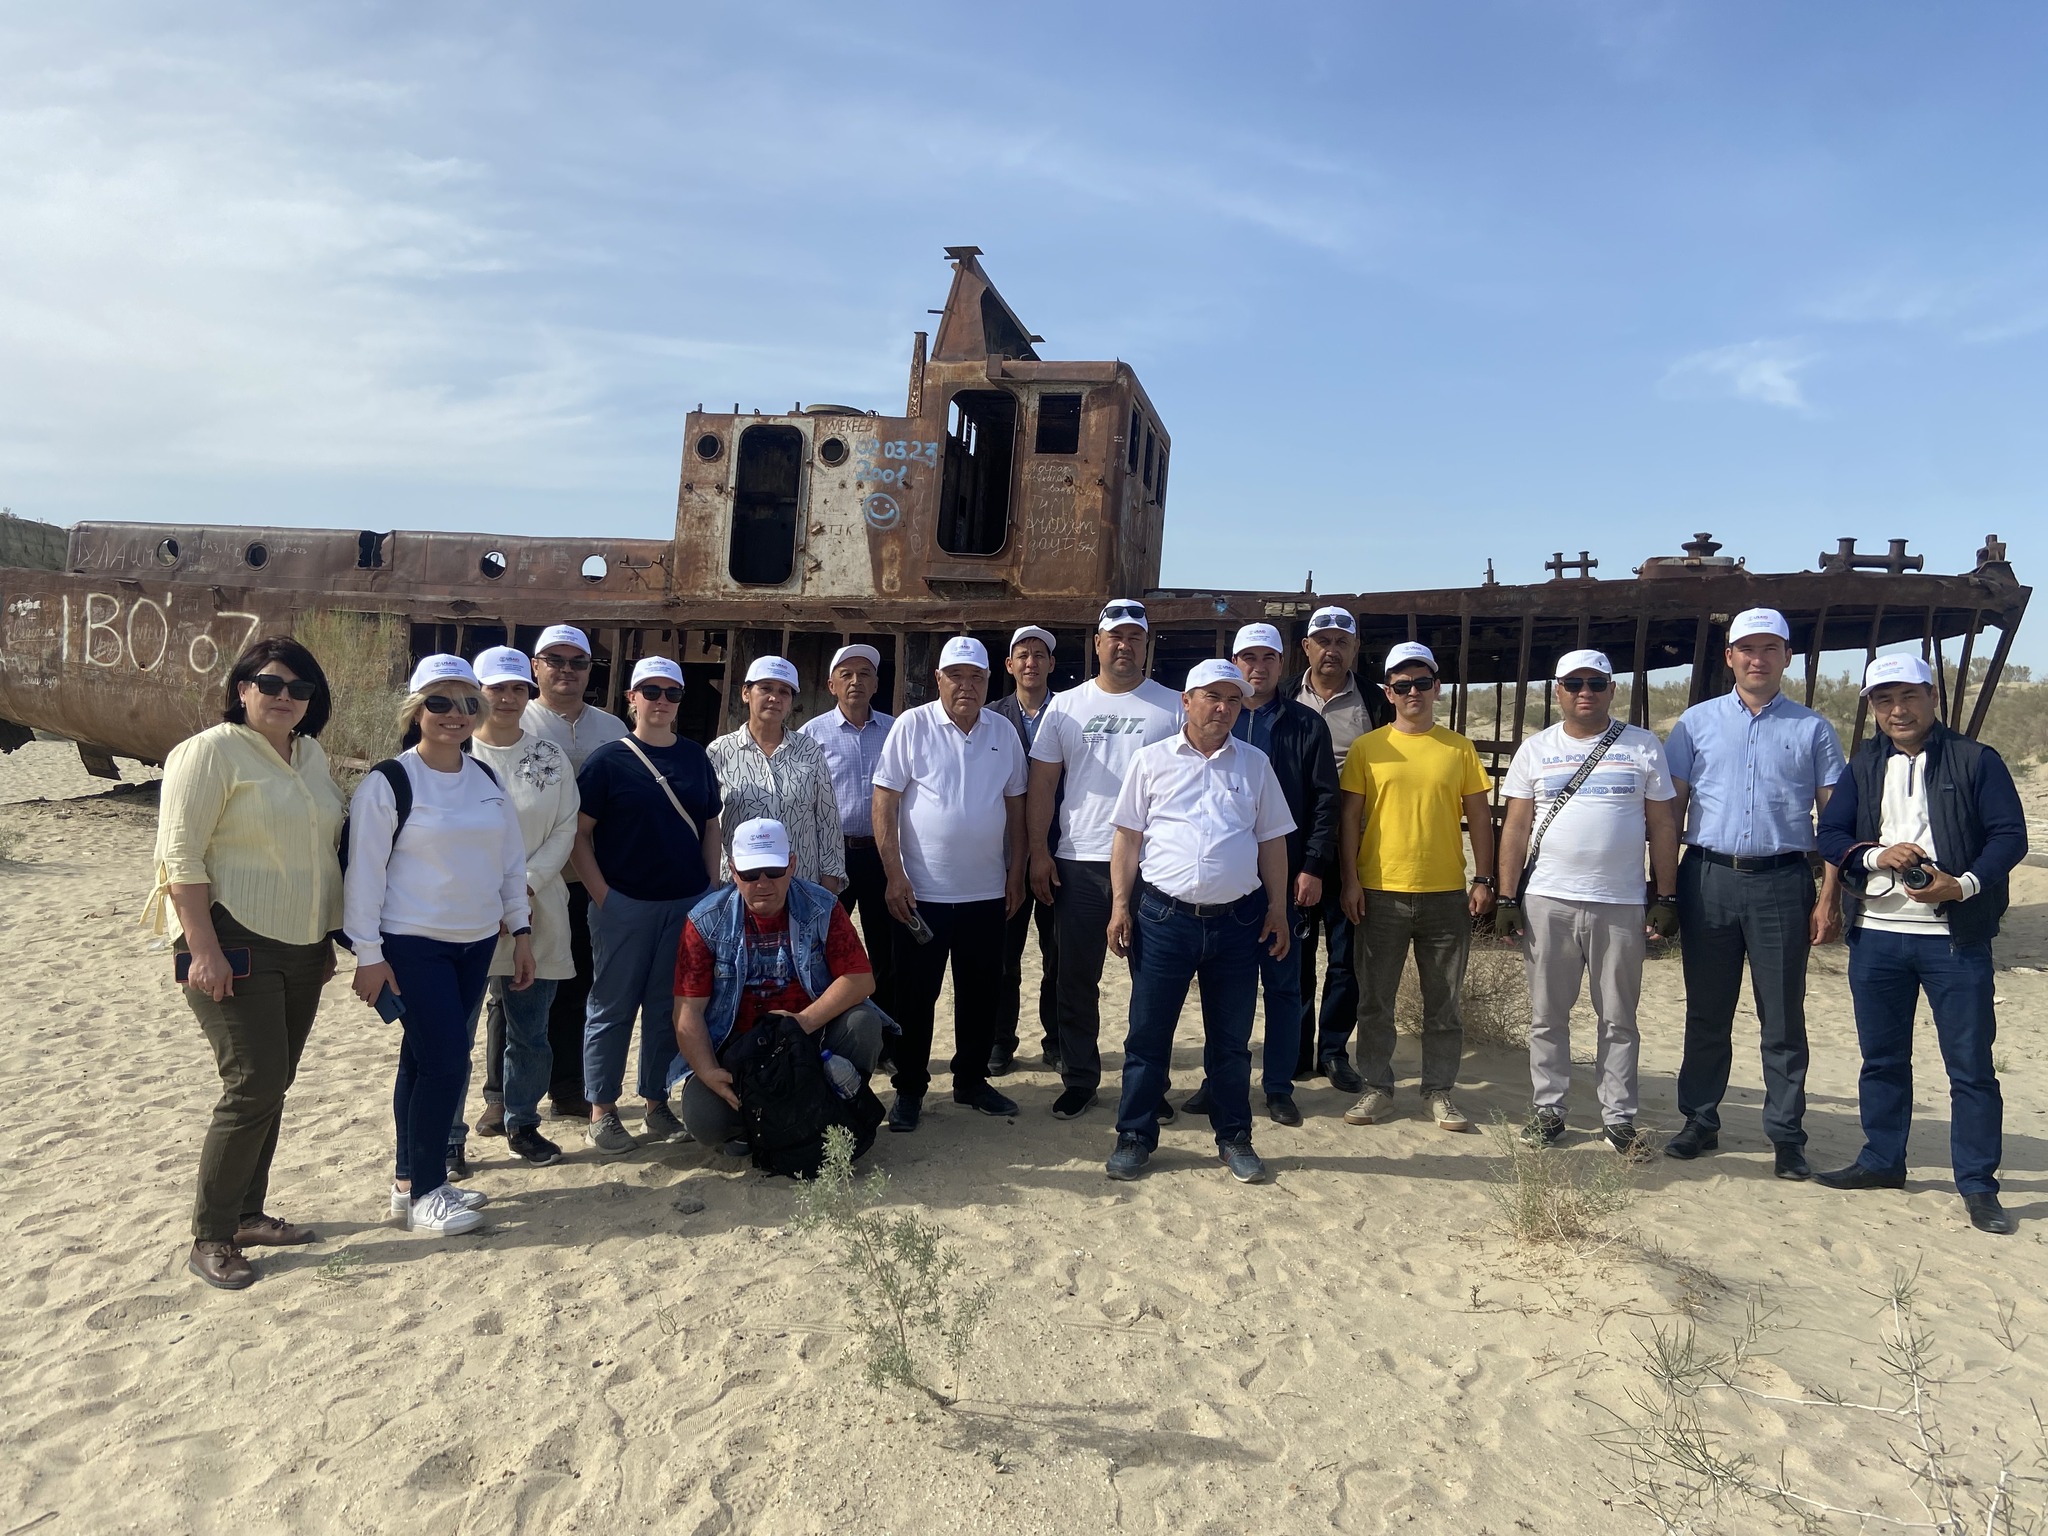 USAID WAVE kicked off a month of Amu Darya River Day celebrations